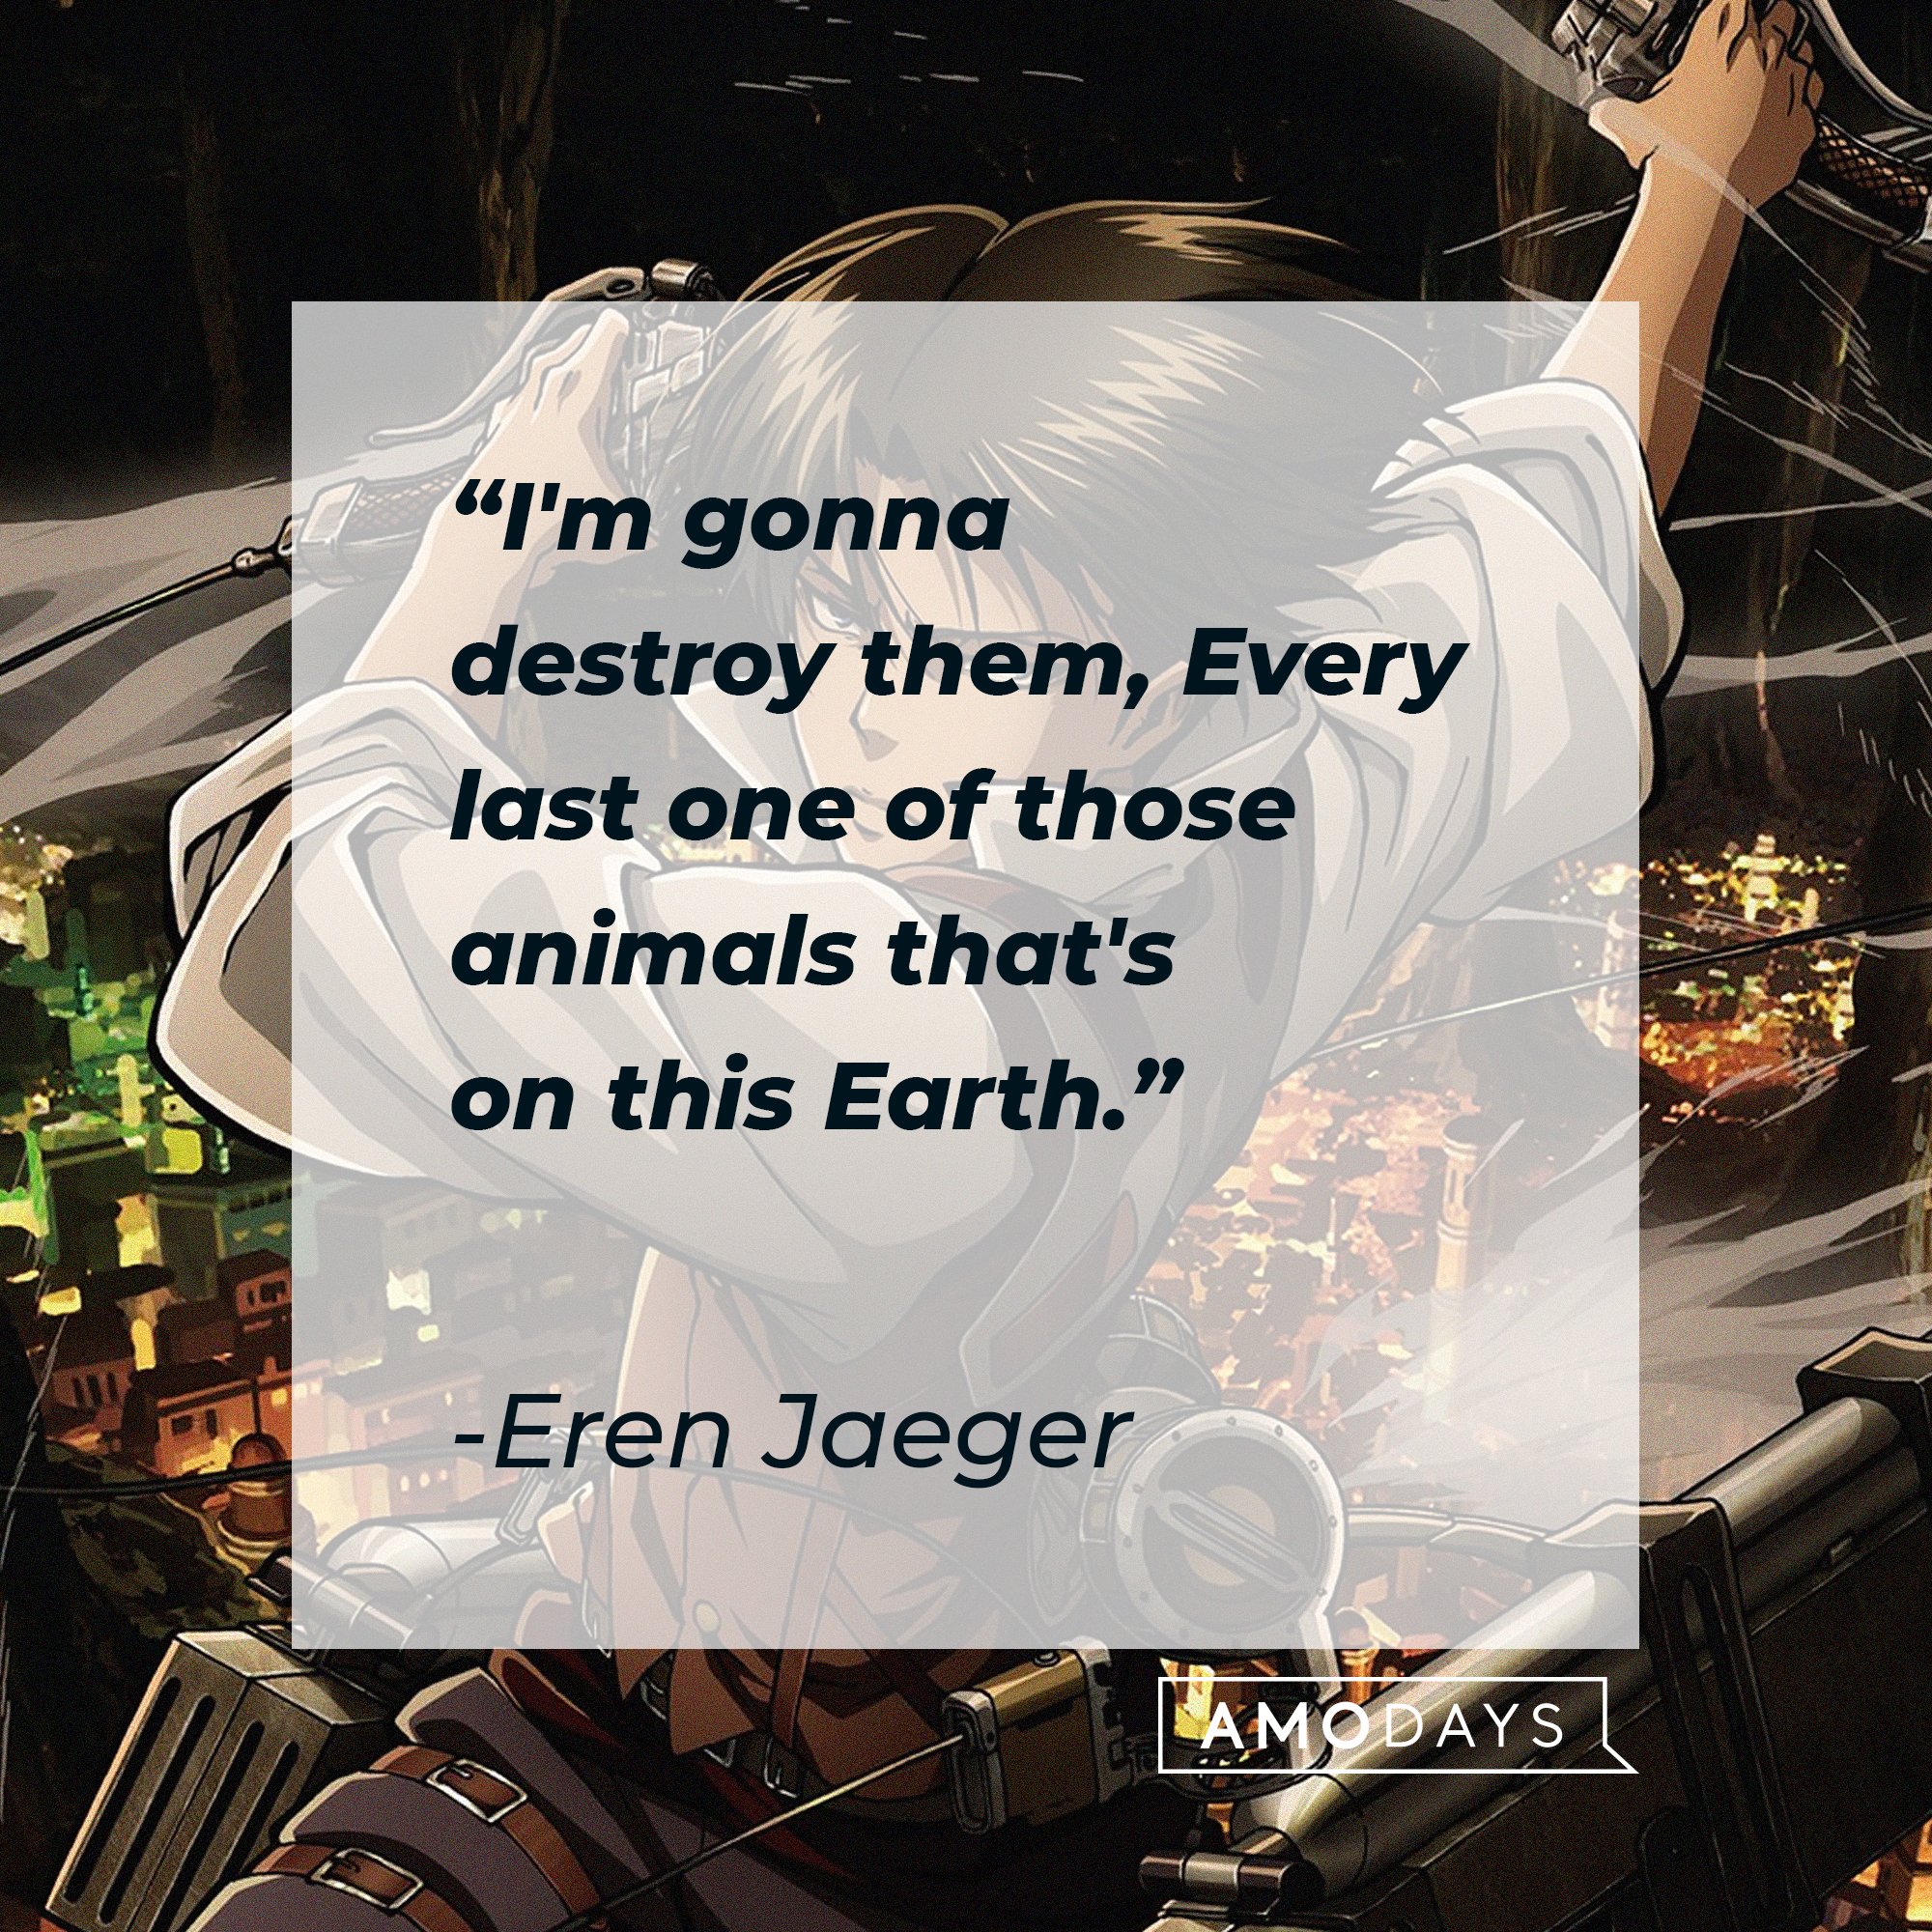 Eren Jaeger’s quote: "I'm gonna destroy them, Every last one of those animals that's on this Earth." | Image: AmoDays